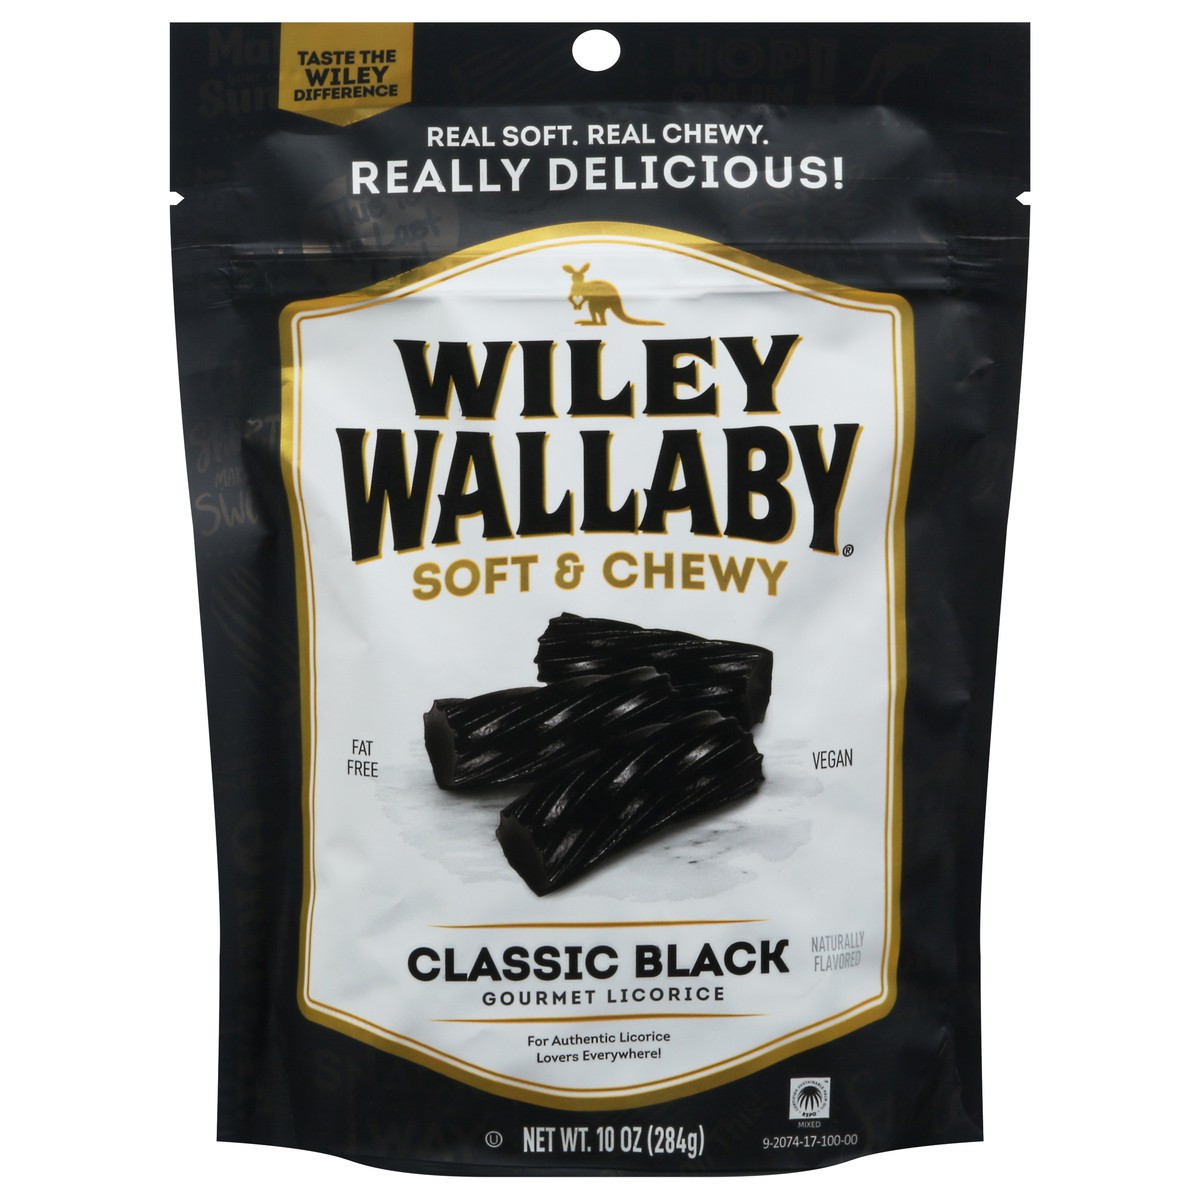 slide 1 of 128, Wiley Wallaby Soft & Chewy Gourmet Classic Black Licorice 10 oz, 10 oz